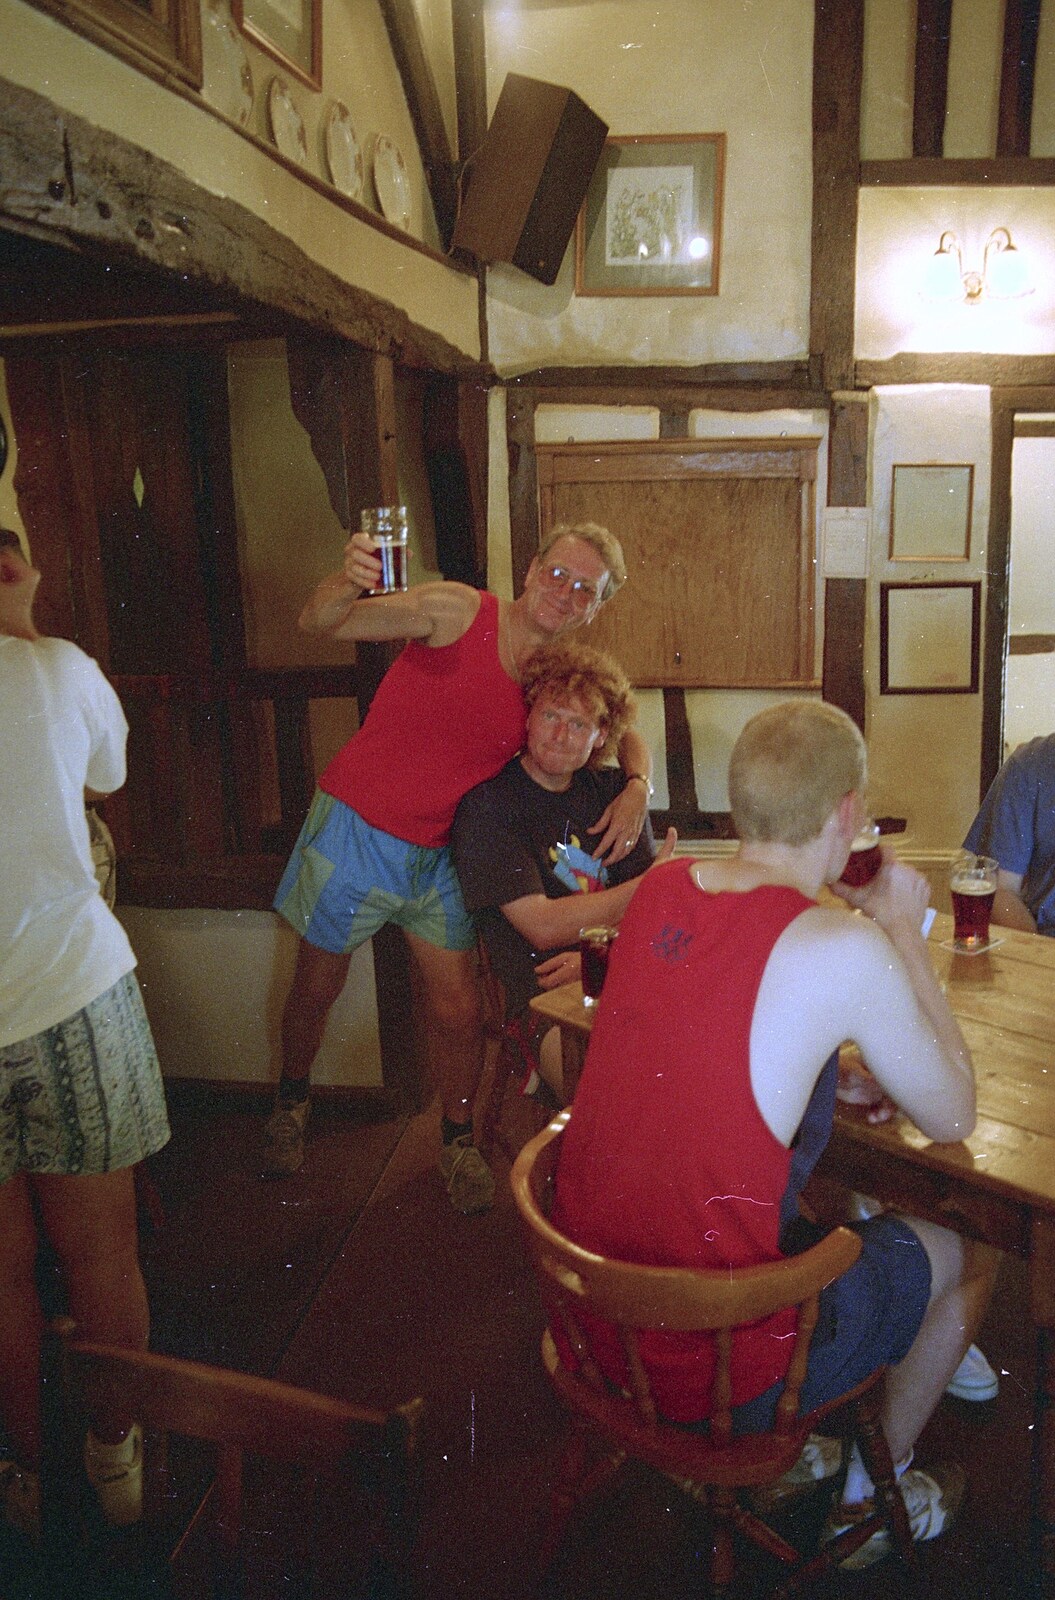 John Willy and Wavy in the Bramford Queen from The First BSCC Bike Ride to Southwold, Suffolk - 10th June 1996